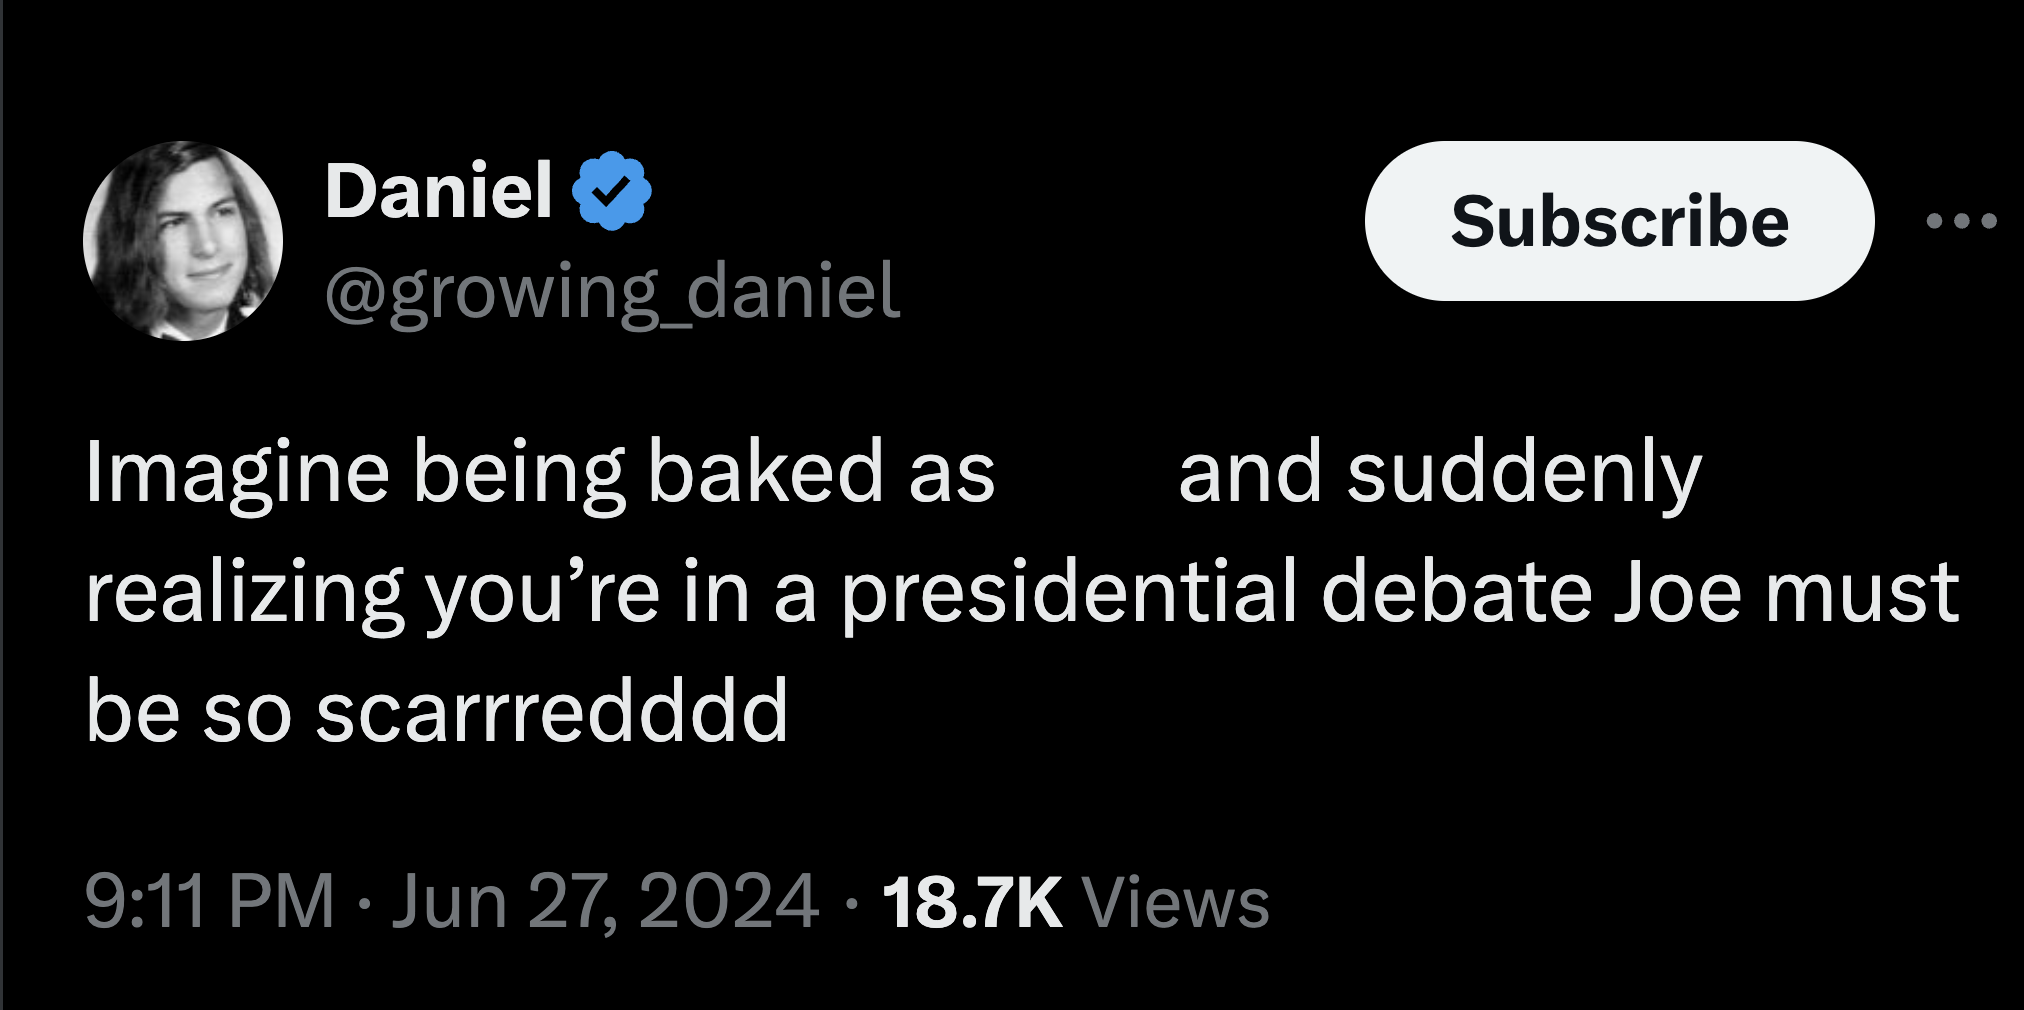 screenshot - Daniel Imagine being baked as Subscribe and suddenly realizing you're in a presidential debate Joe must be so scarrredddd Views